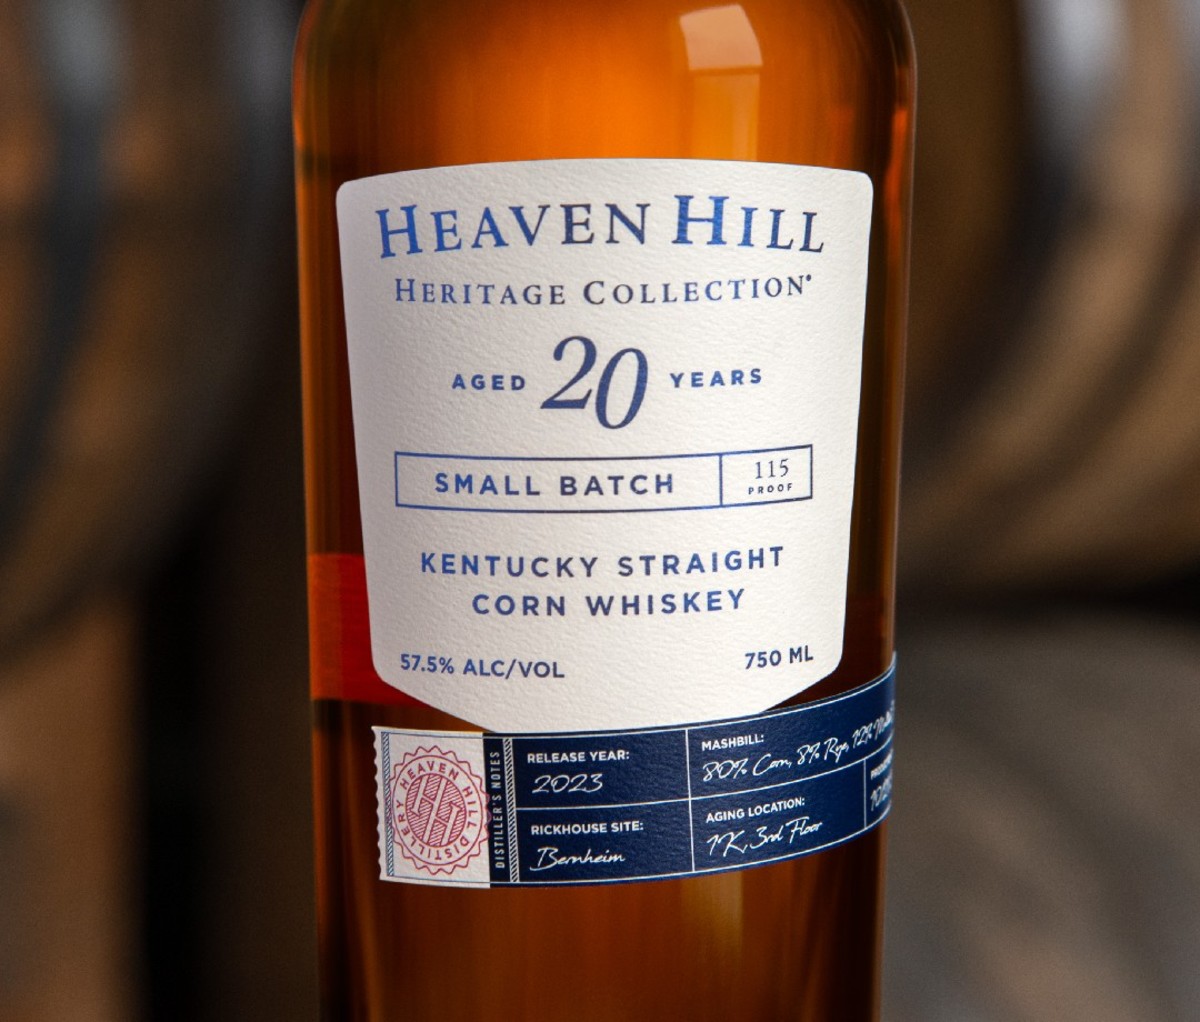 Bottle of Heaven Hill 20-Year-Old Corn Whiskey, closeup on label.